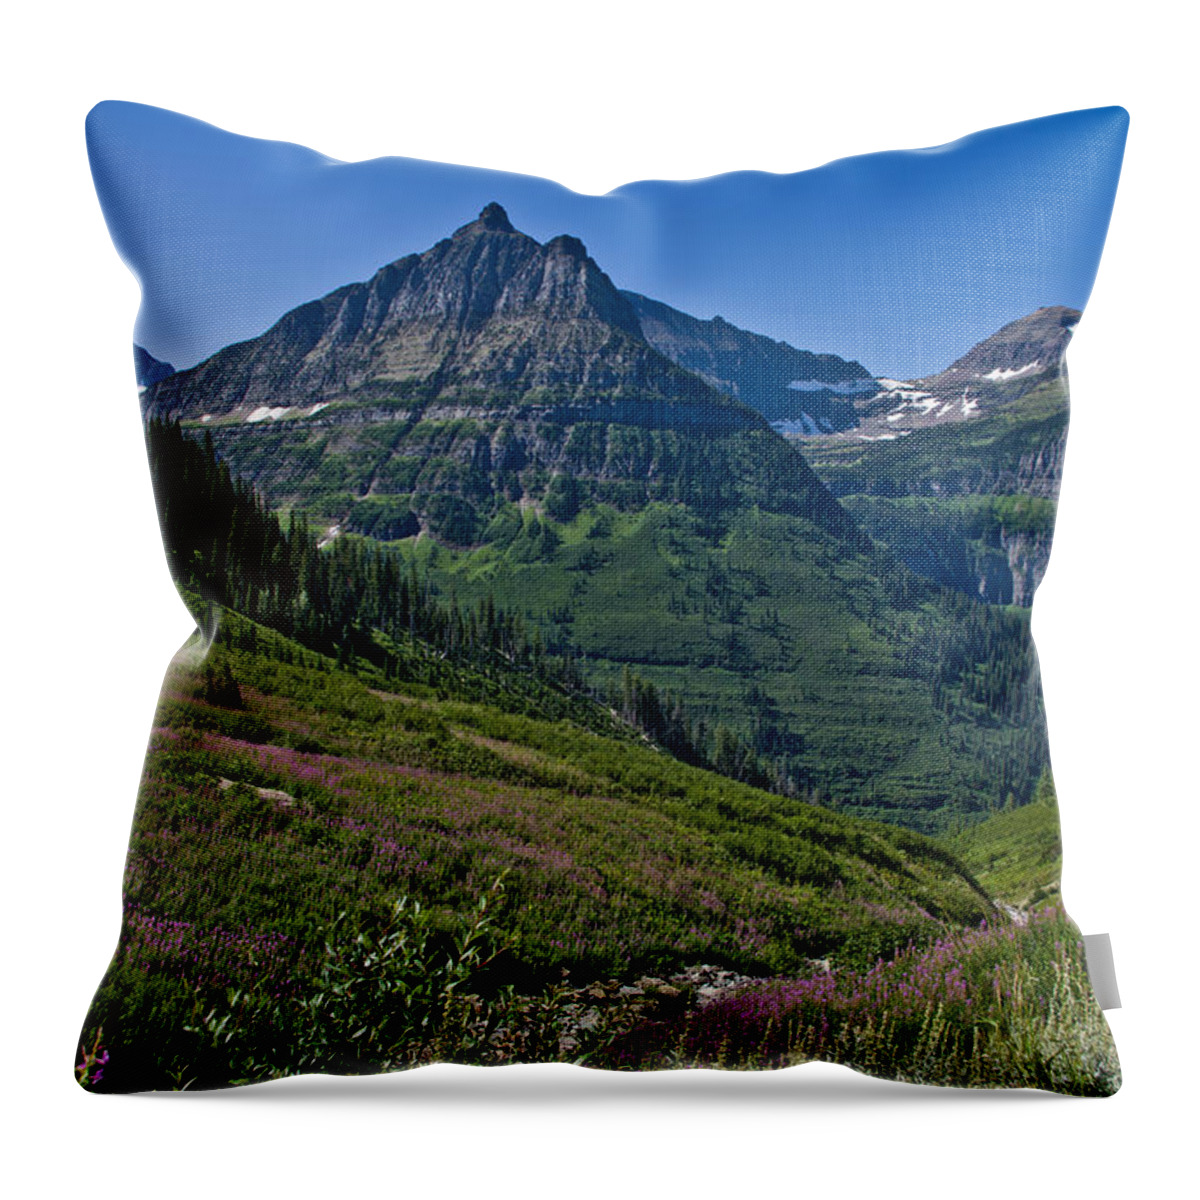 Mountain Throw Pillow featuring the photograph Big Bend, Glacier National Park by Jedediah Hohf